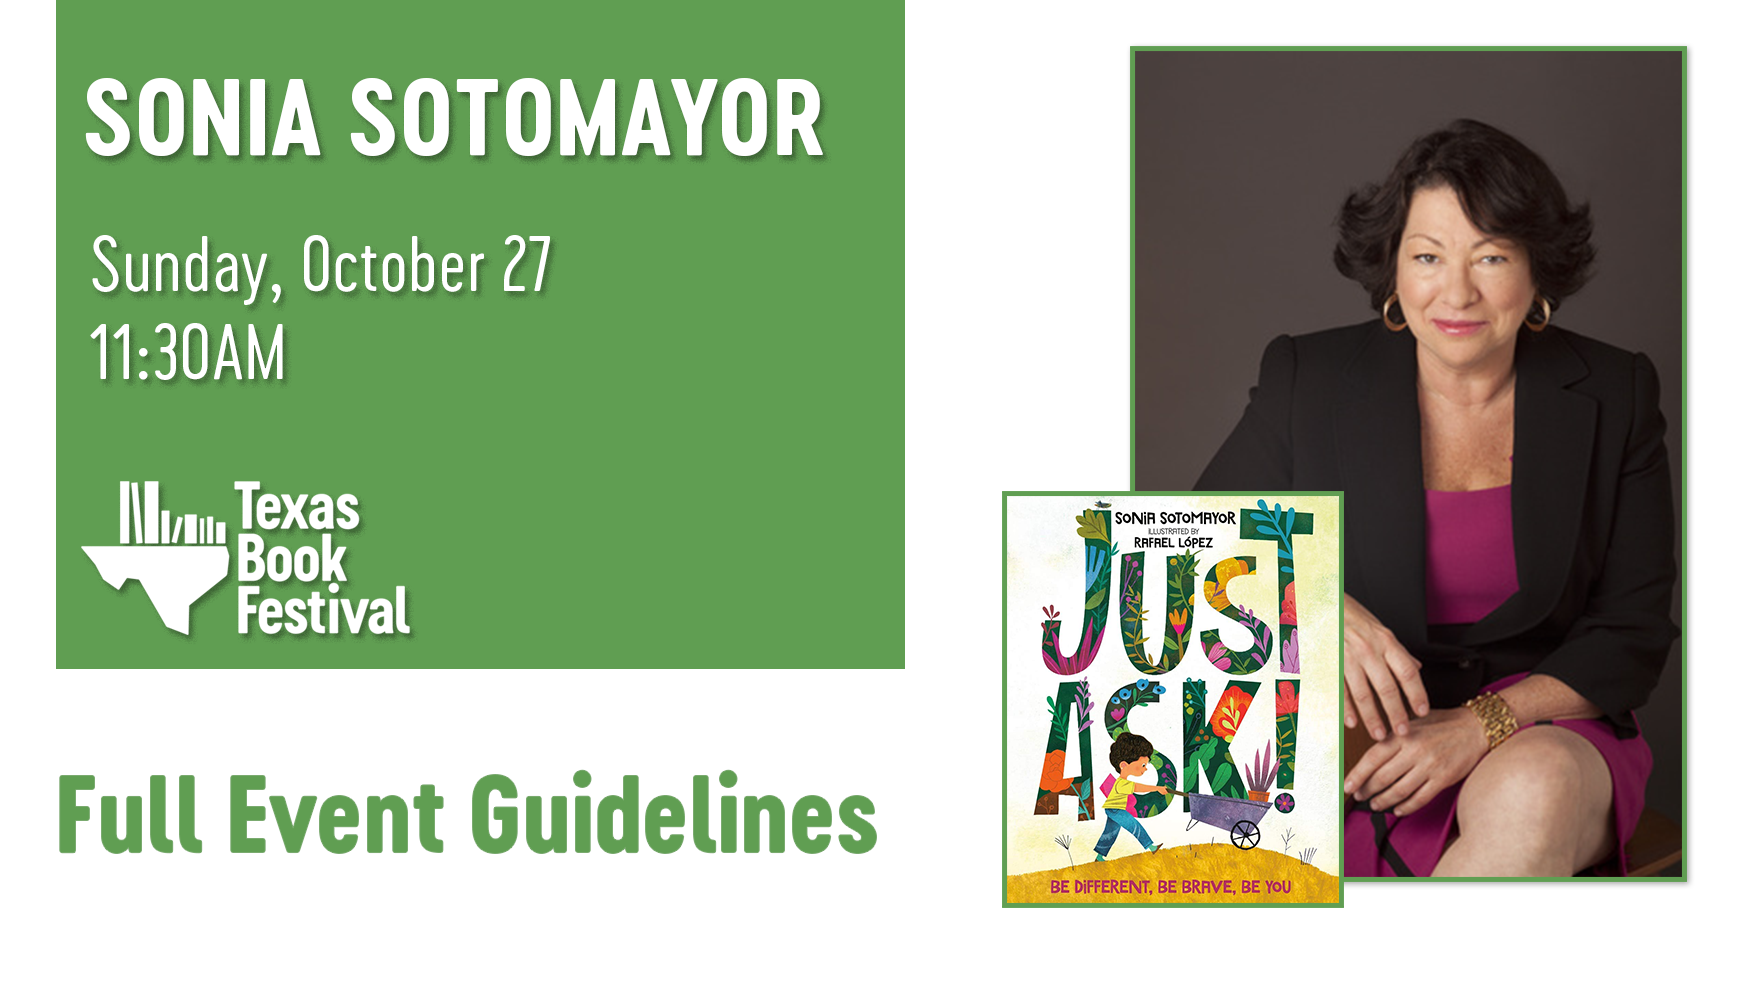 How to See Sonia Sotomayor at the Texas Book Festival